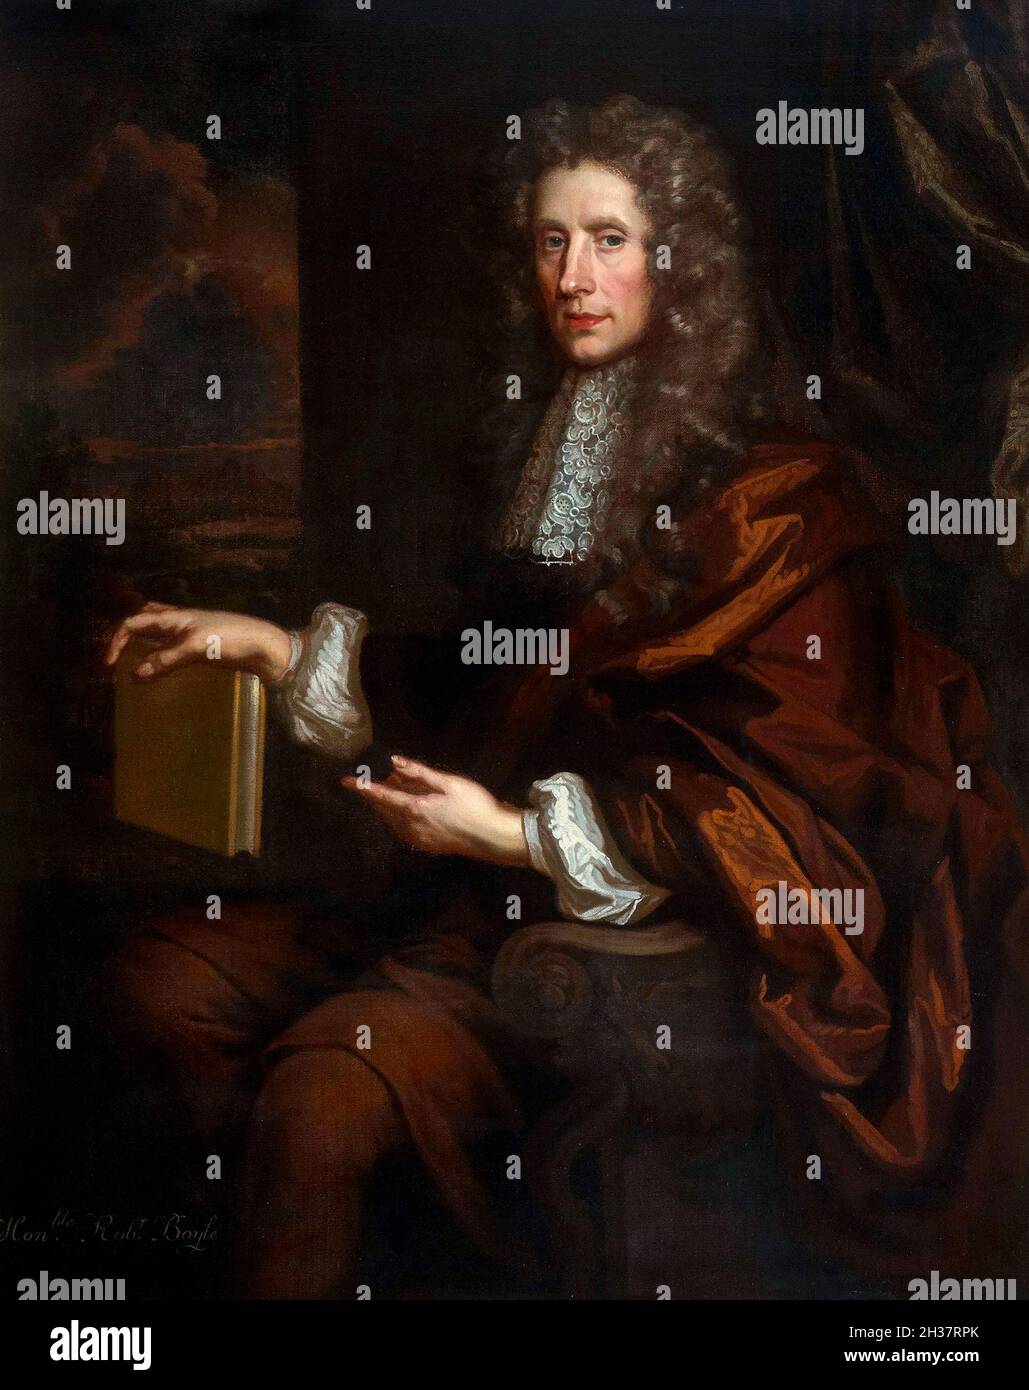 Robert Boyle. Portrait of the Anglo-Irish natural philosopher, chemist, physicist, and inventor, Robert Boyle (1627-1691) by John Riley, oil on canvas, 1689 Stock Photo